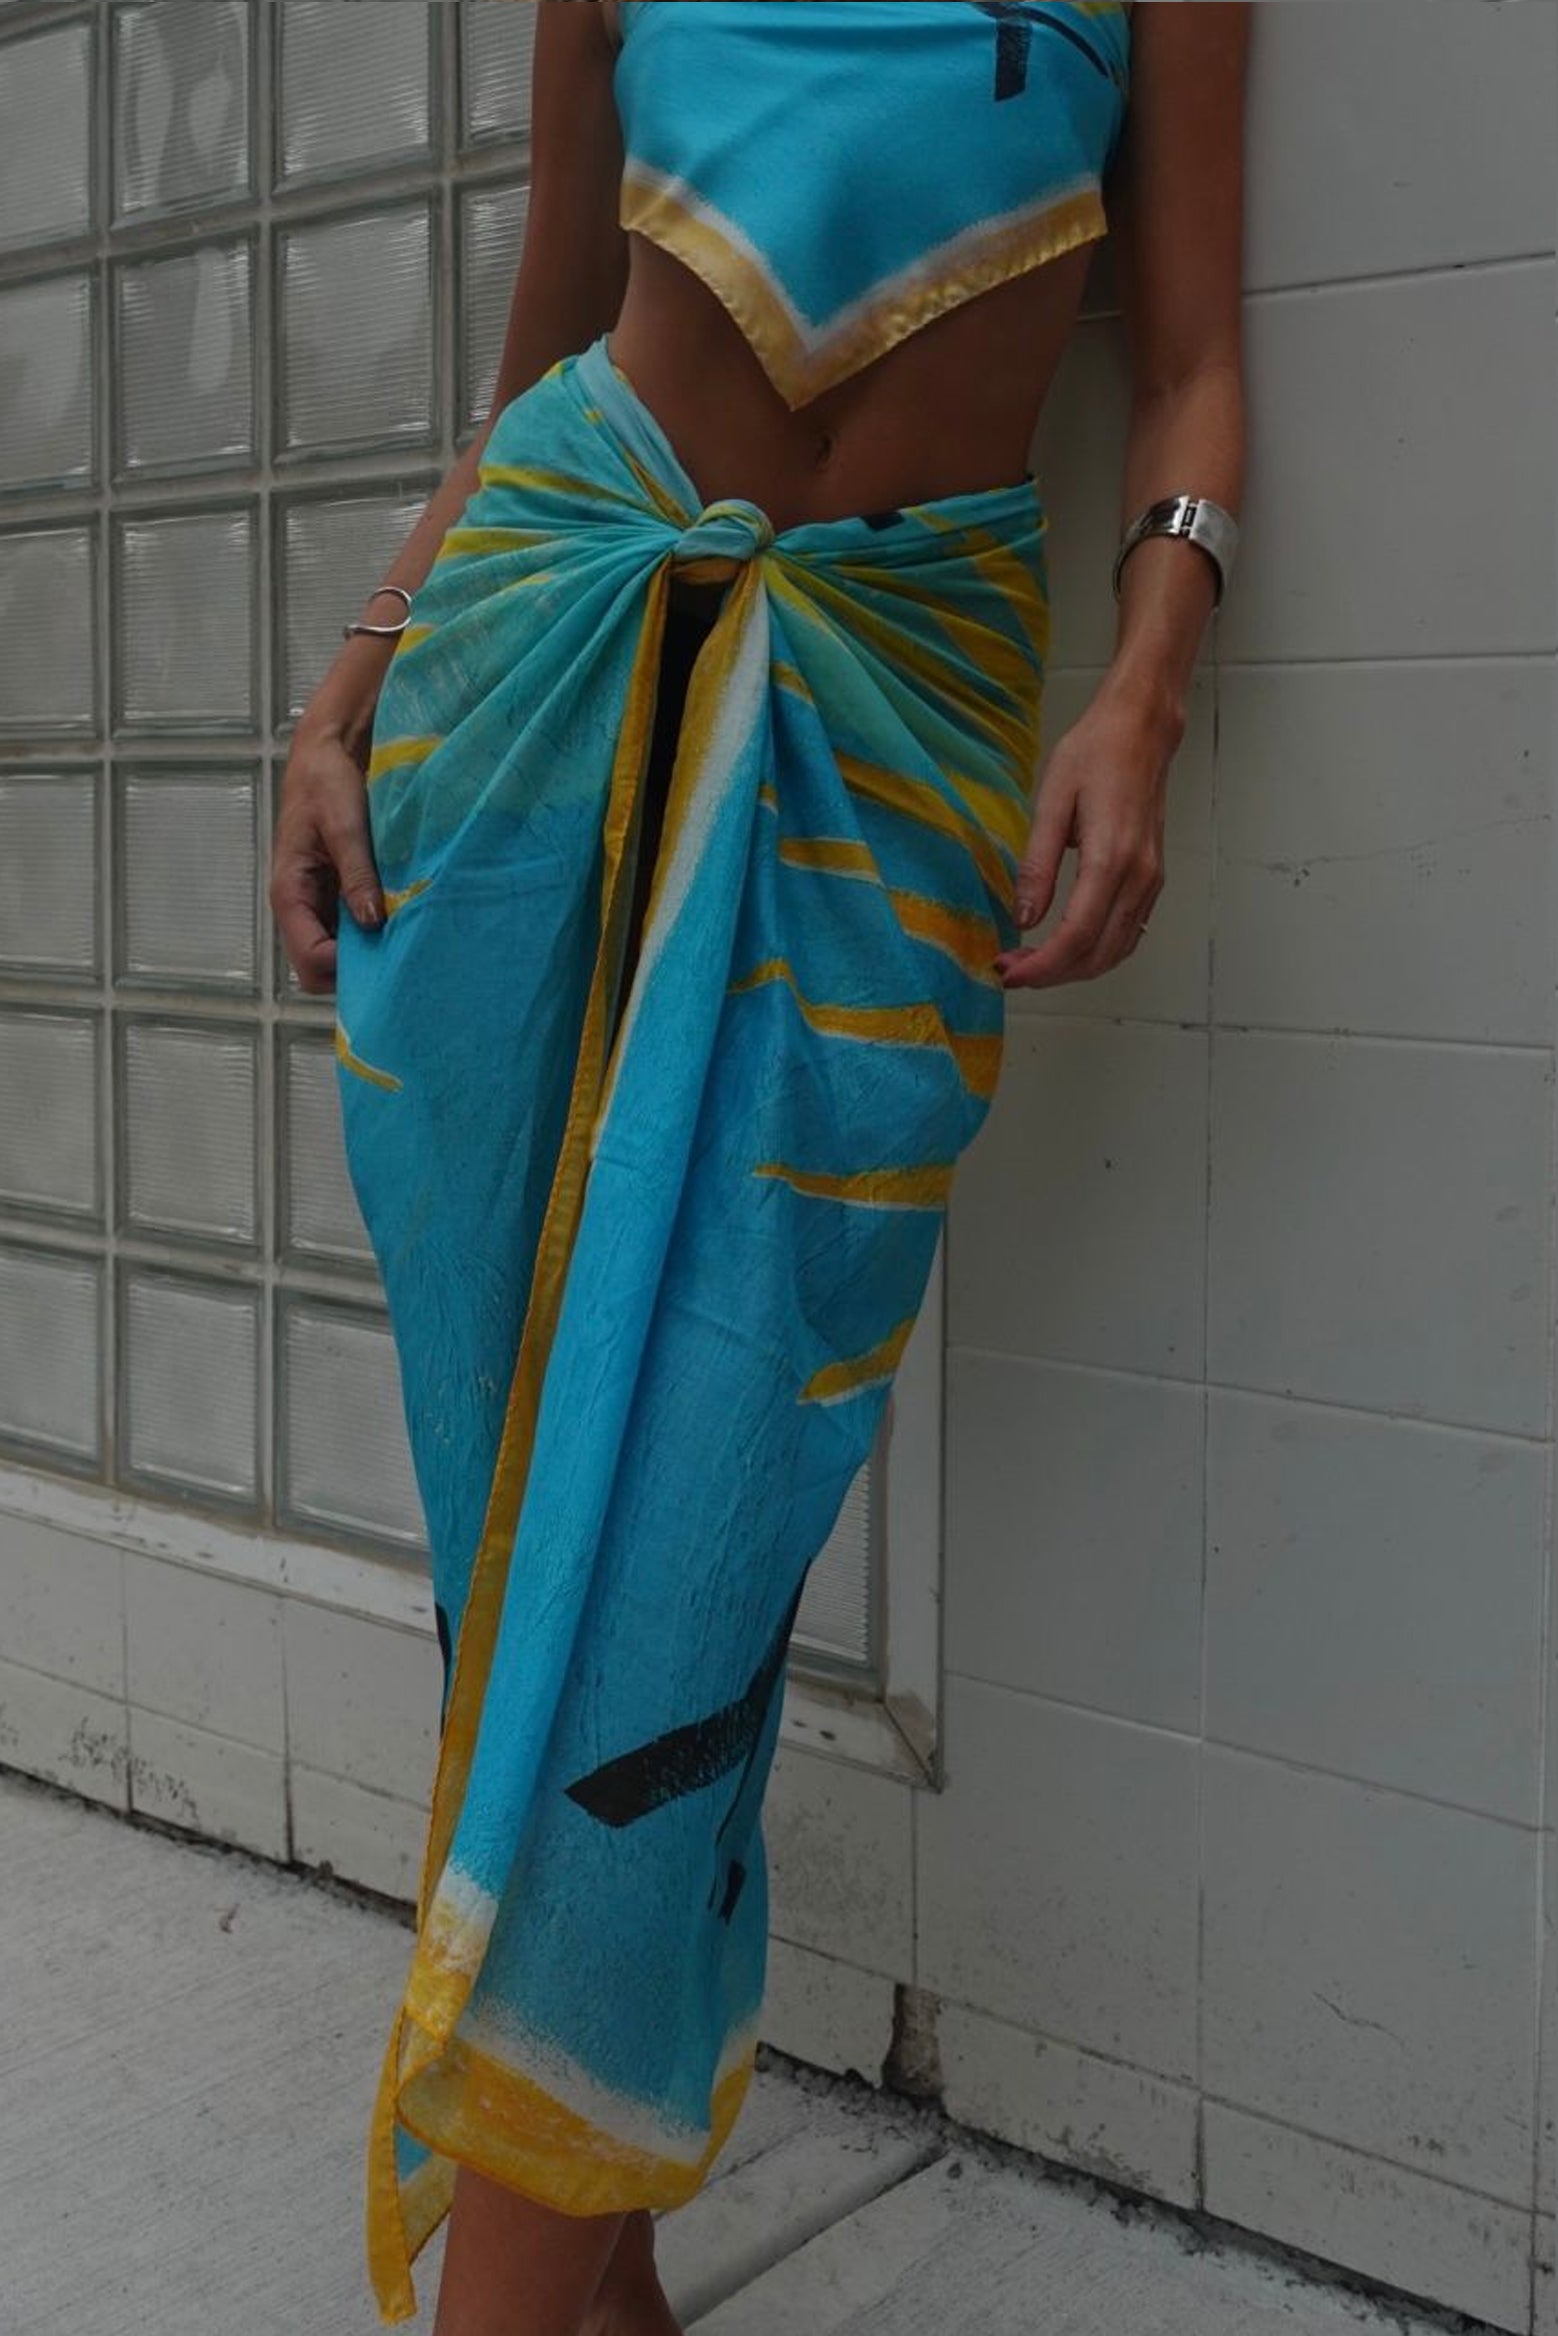 Atlas Travel Sarong in Sydney Sun available at The New Trend Australia.